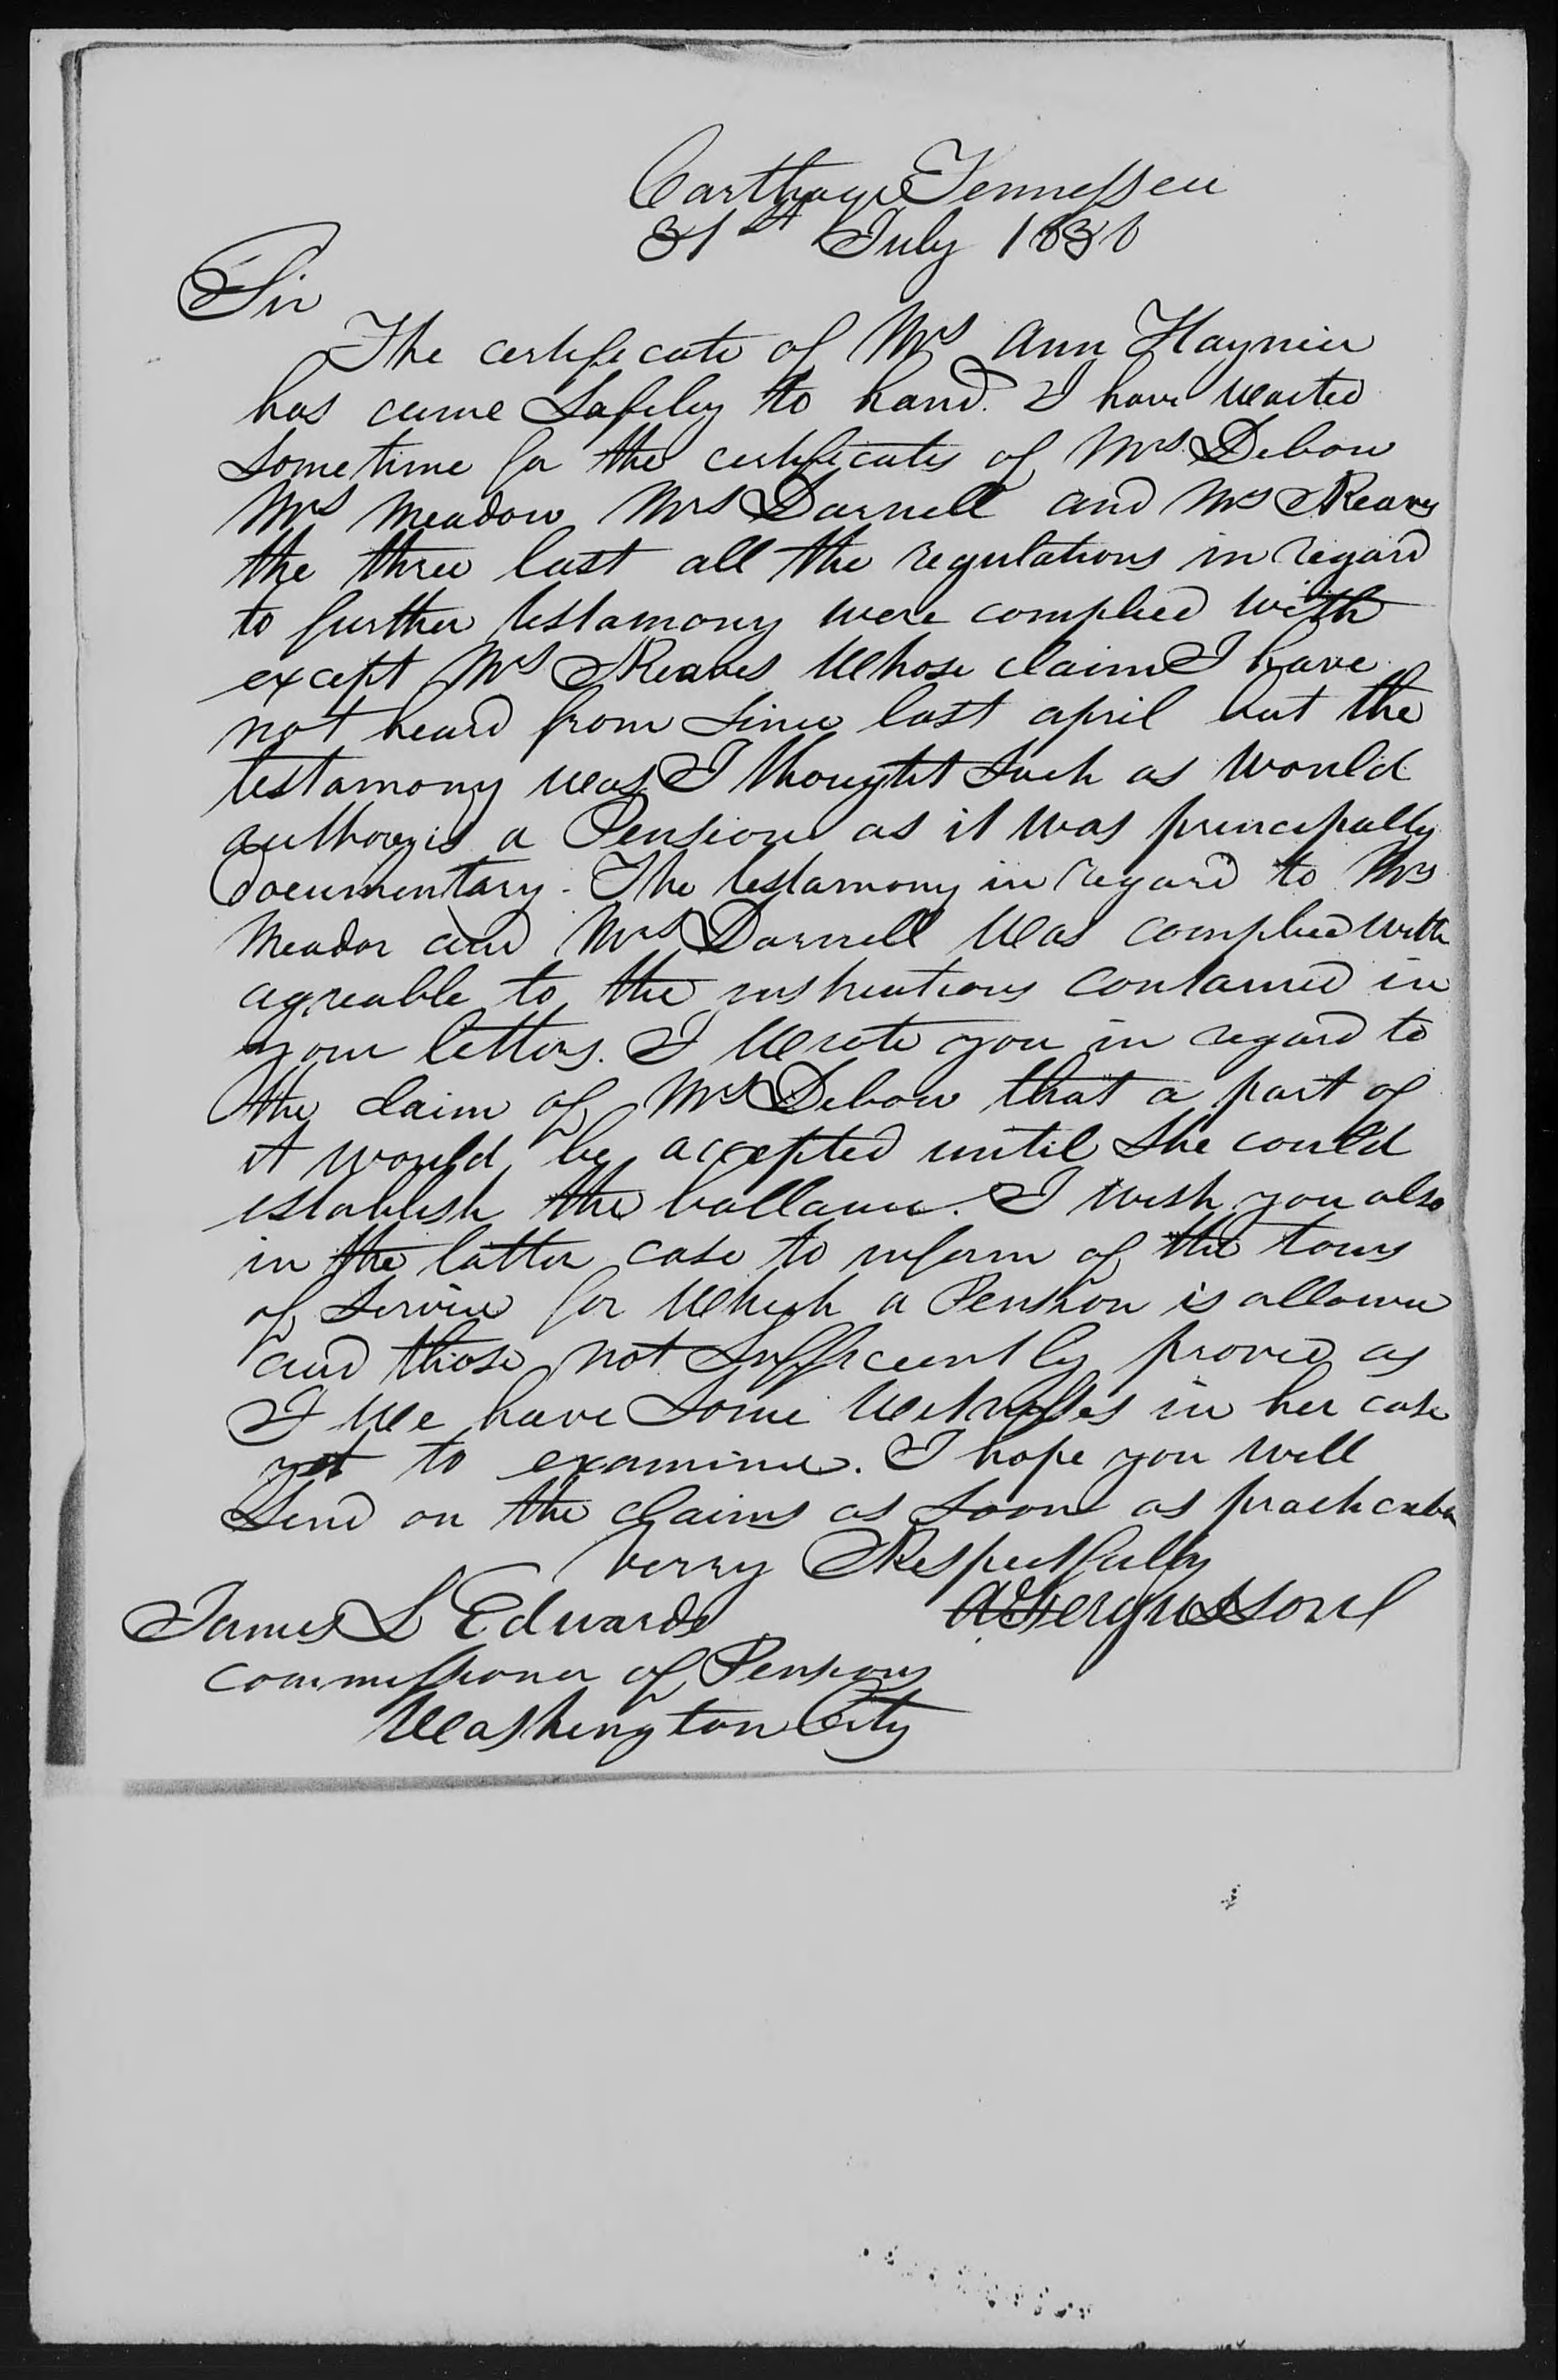 Letter from Adam Ferguson to James L. Edwards, 31 July 1838, page 1